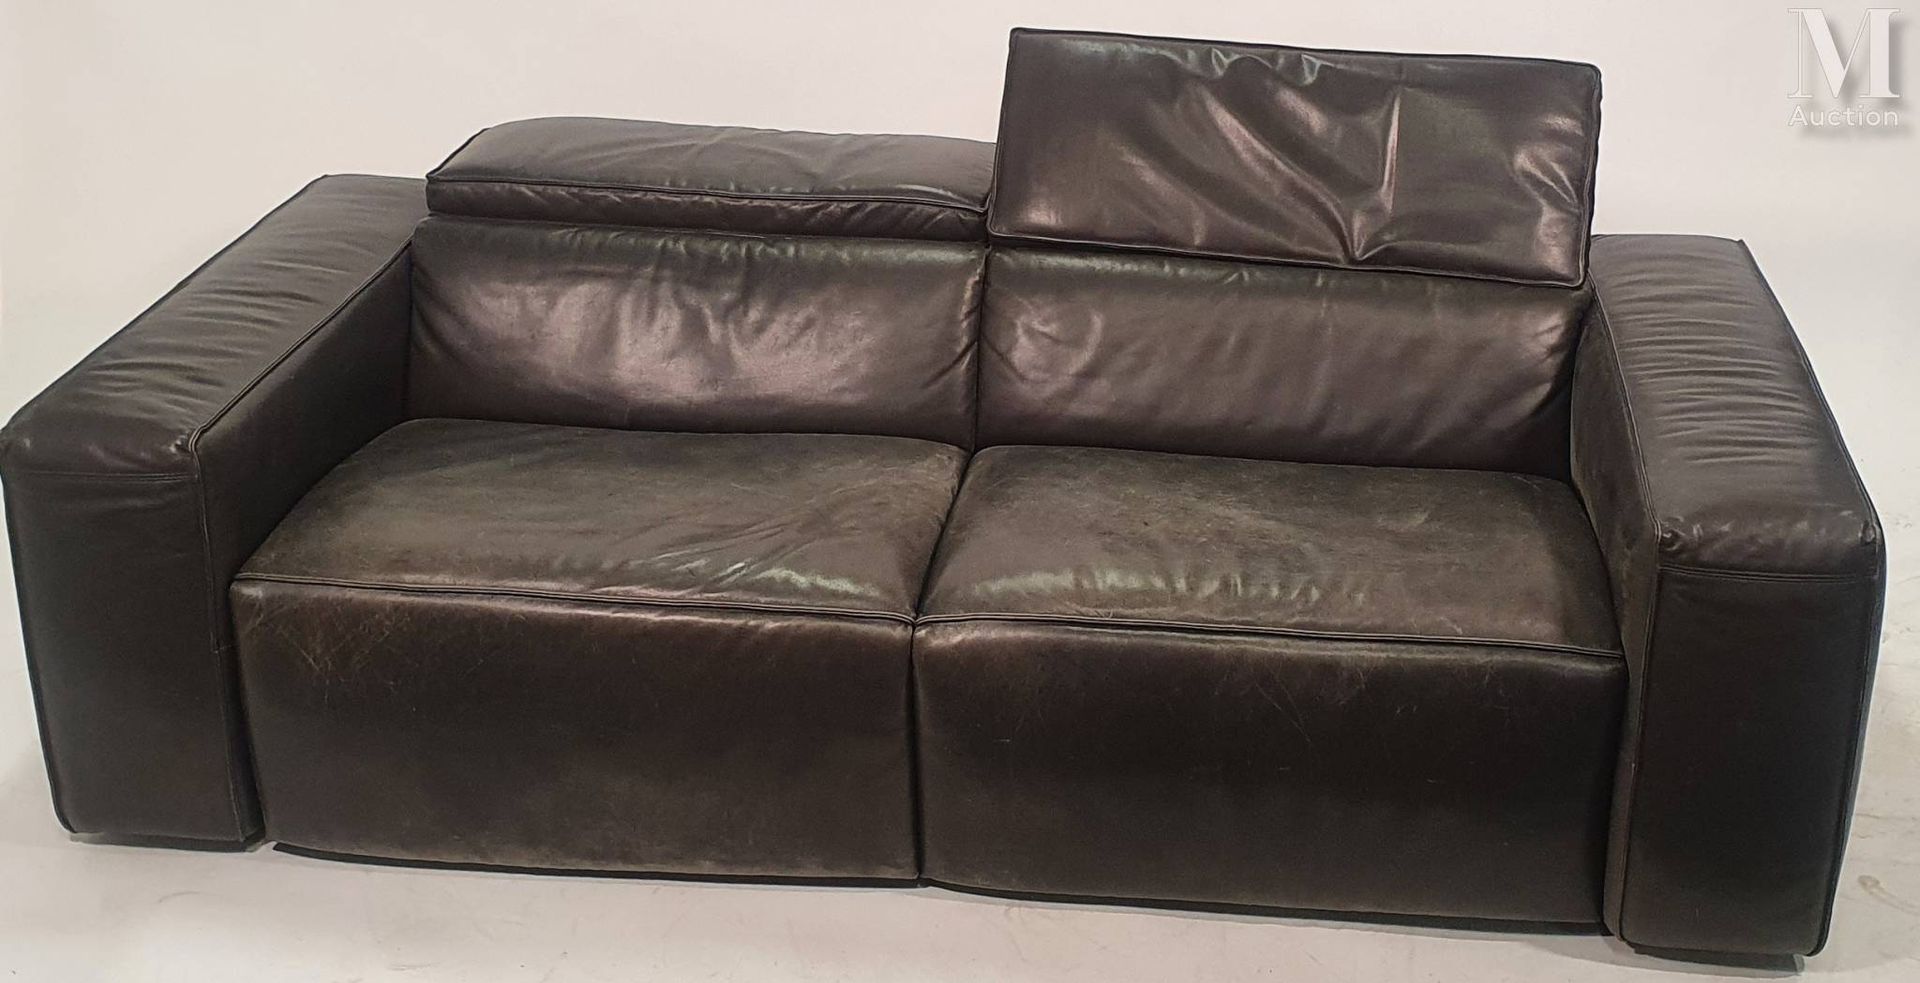 TRAVAIL ITALIEN Sofa with wooden structure covered with black leather. Adjustabl&hellip;